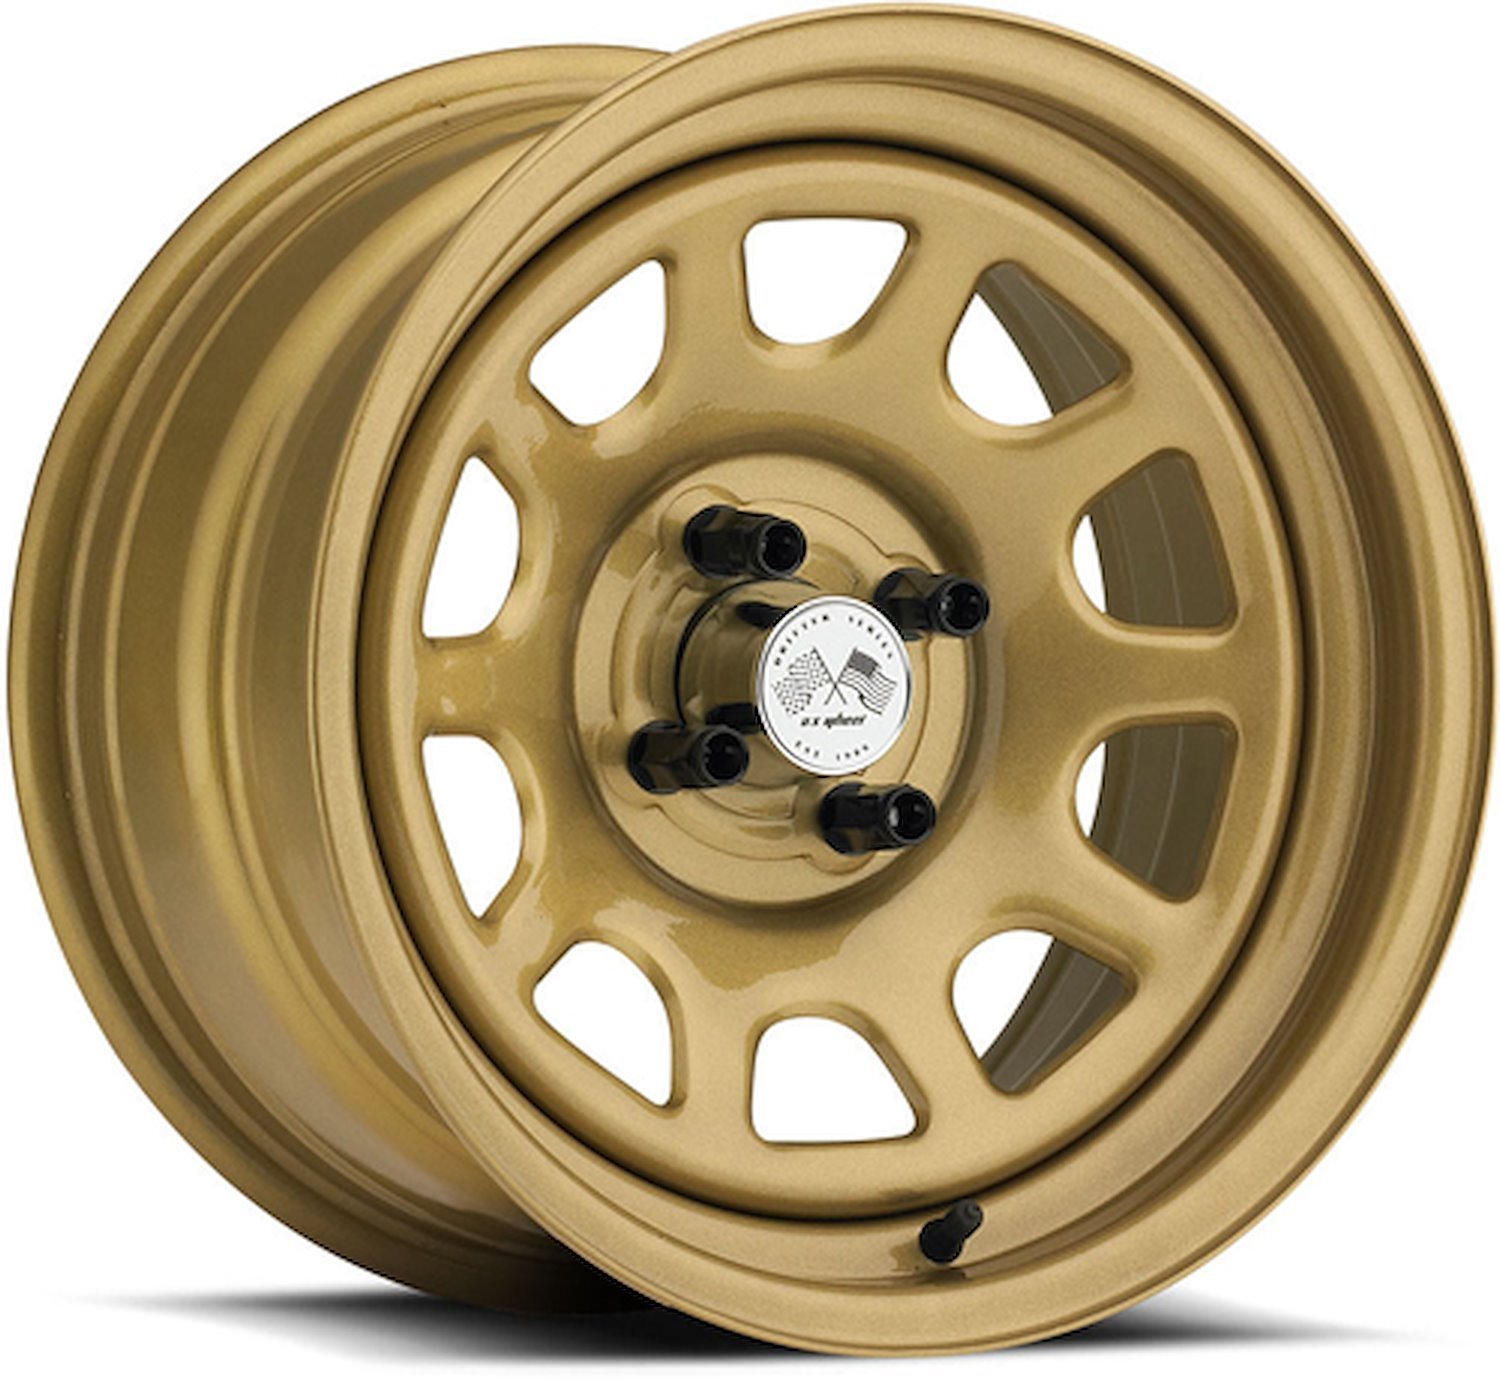 PAINTED DAYTONA FWD DRIFTER GOLD 16 x 10 4 x 100 Bolt Circle 55 Back Spacing 0 offset 266 Center Bore 1400 lbs Load Rating